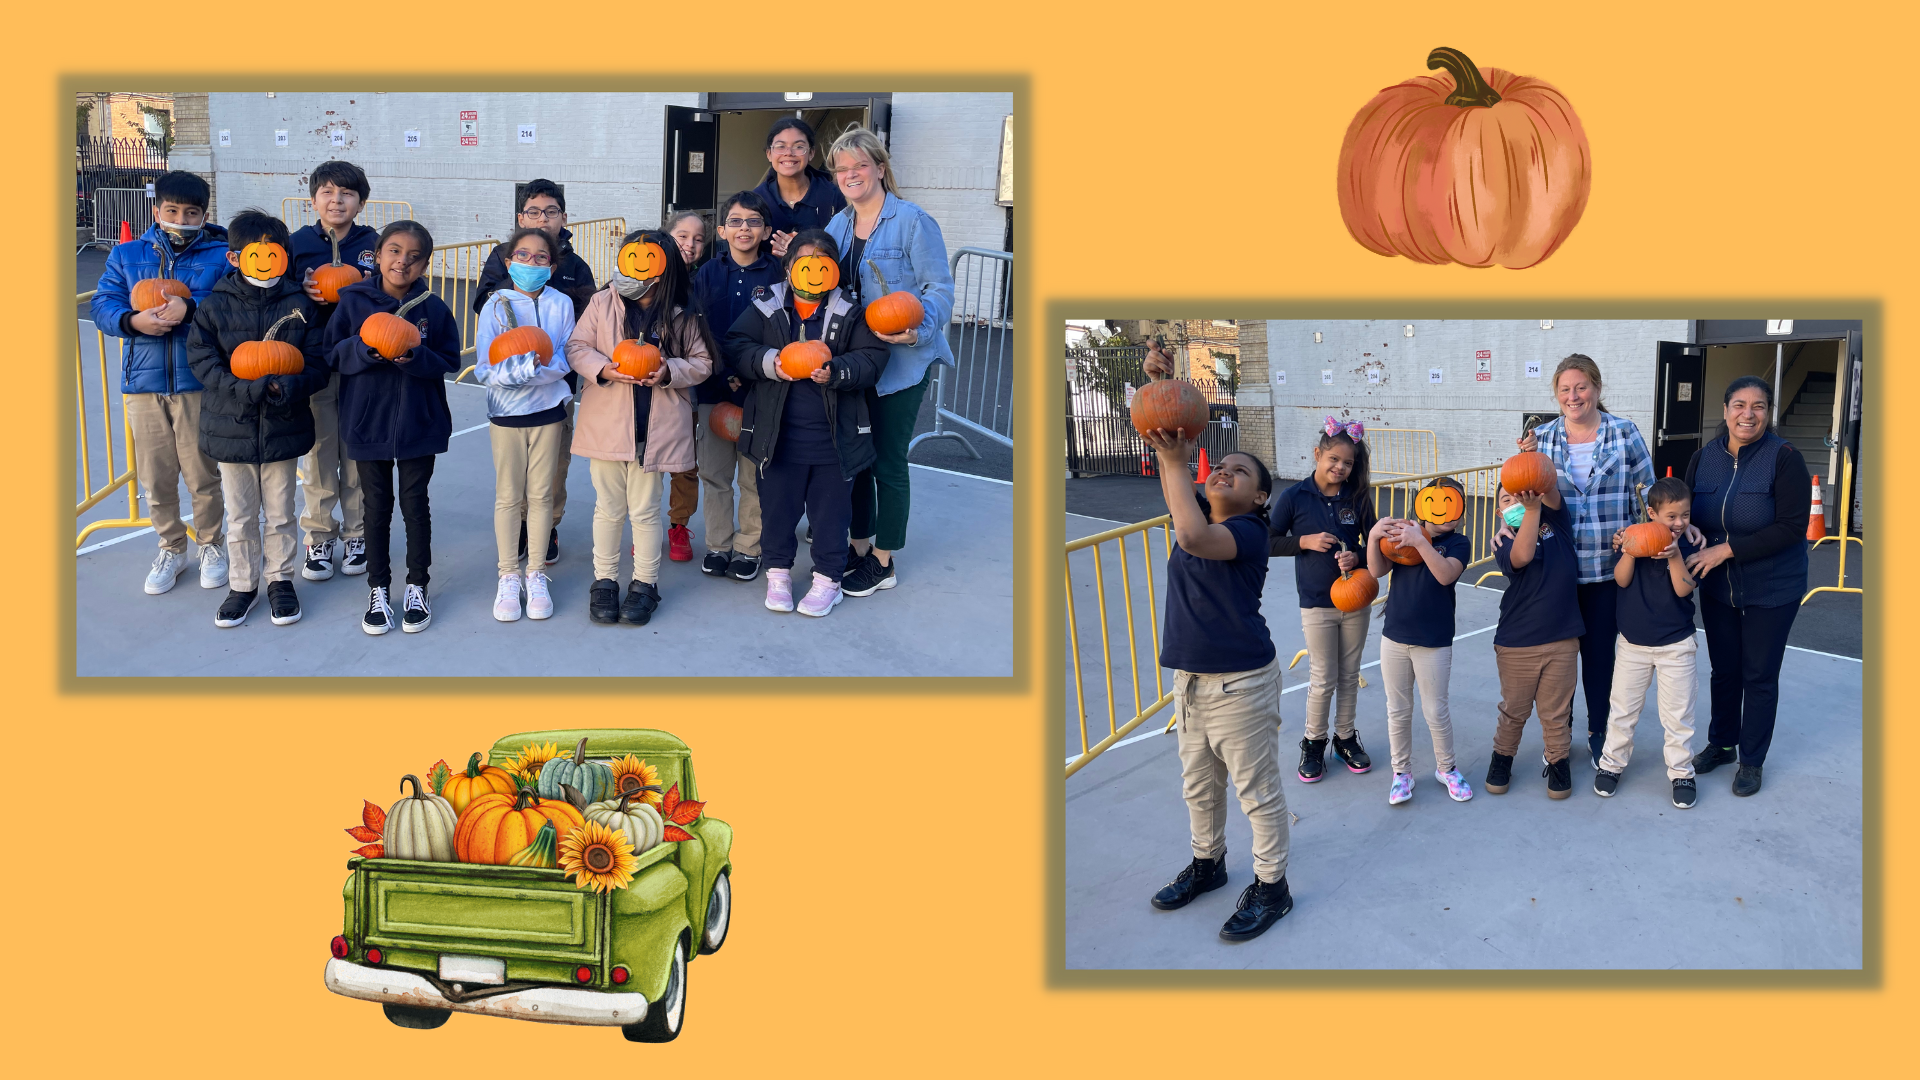 Students smiling and enjoying pumpkins given to them